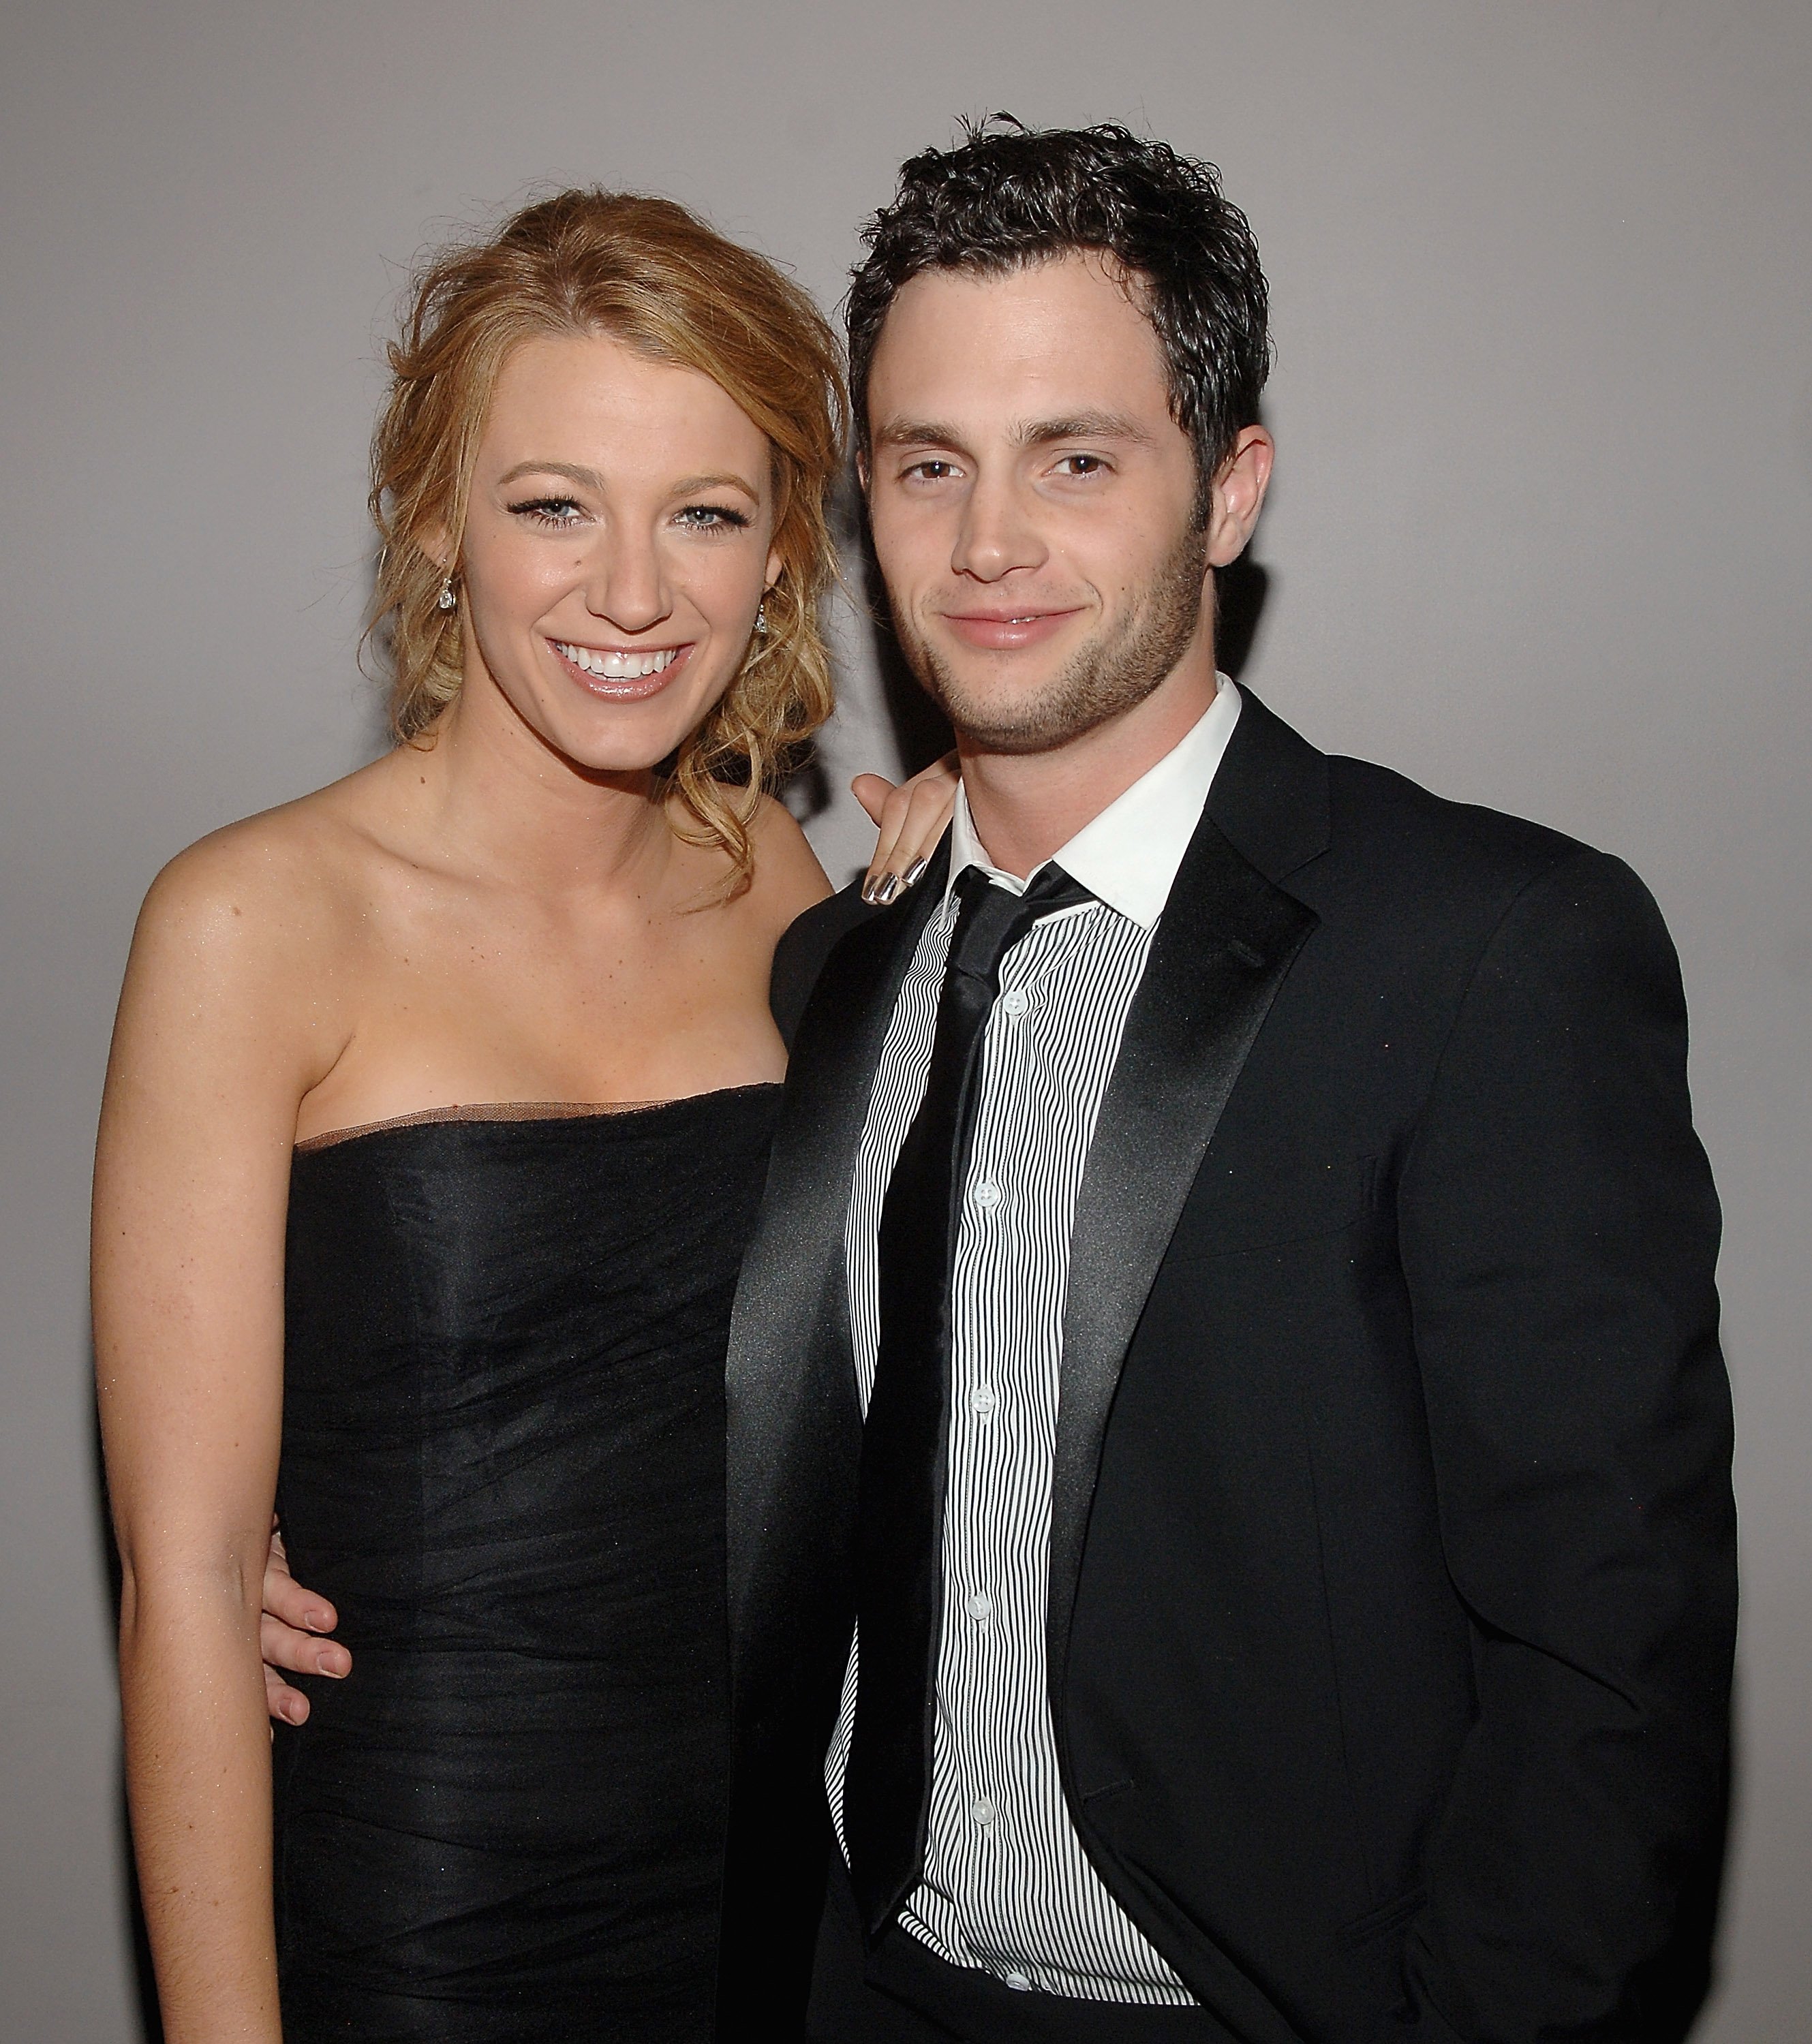 Blake Lively and Penn Badgley at Philippe in New York on May 5, 2008. | Source: Getty Images